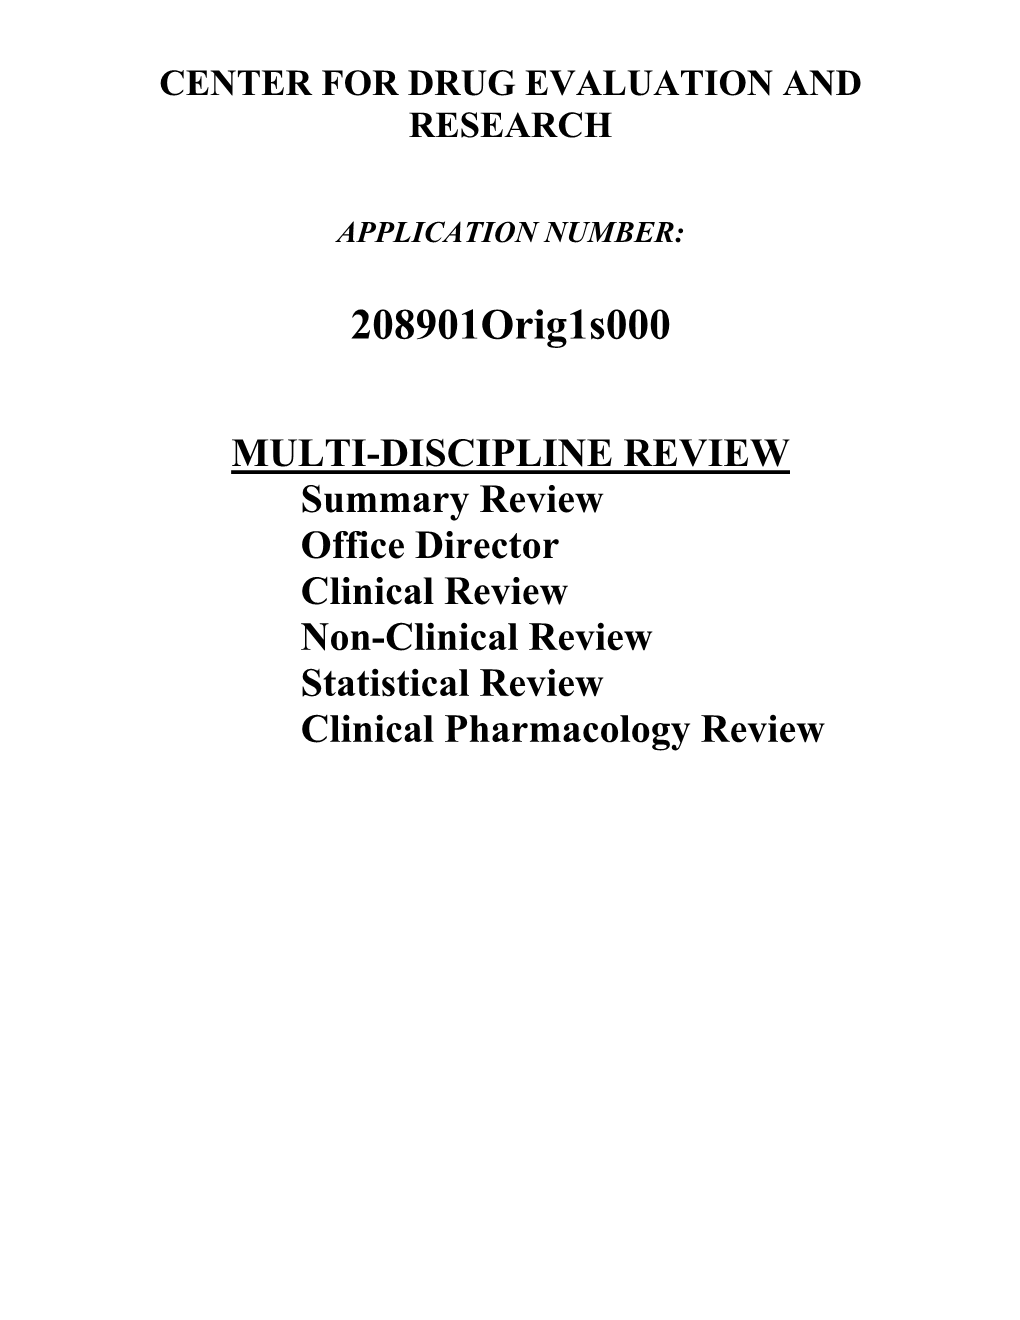 MULTI-DISCIPLINE REVIEW Summary Review Office Director Clinical Review Non-Clinical Review Statistical Review Clinical Pharmacology Review